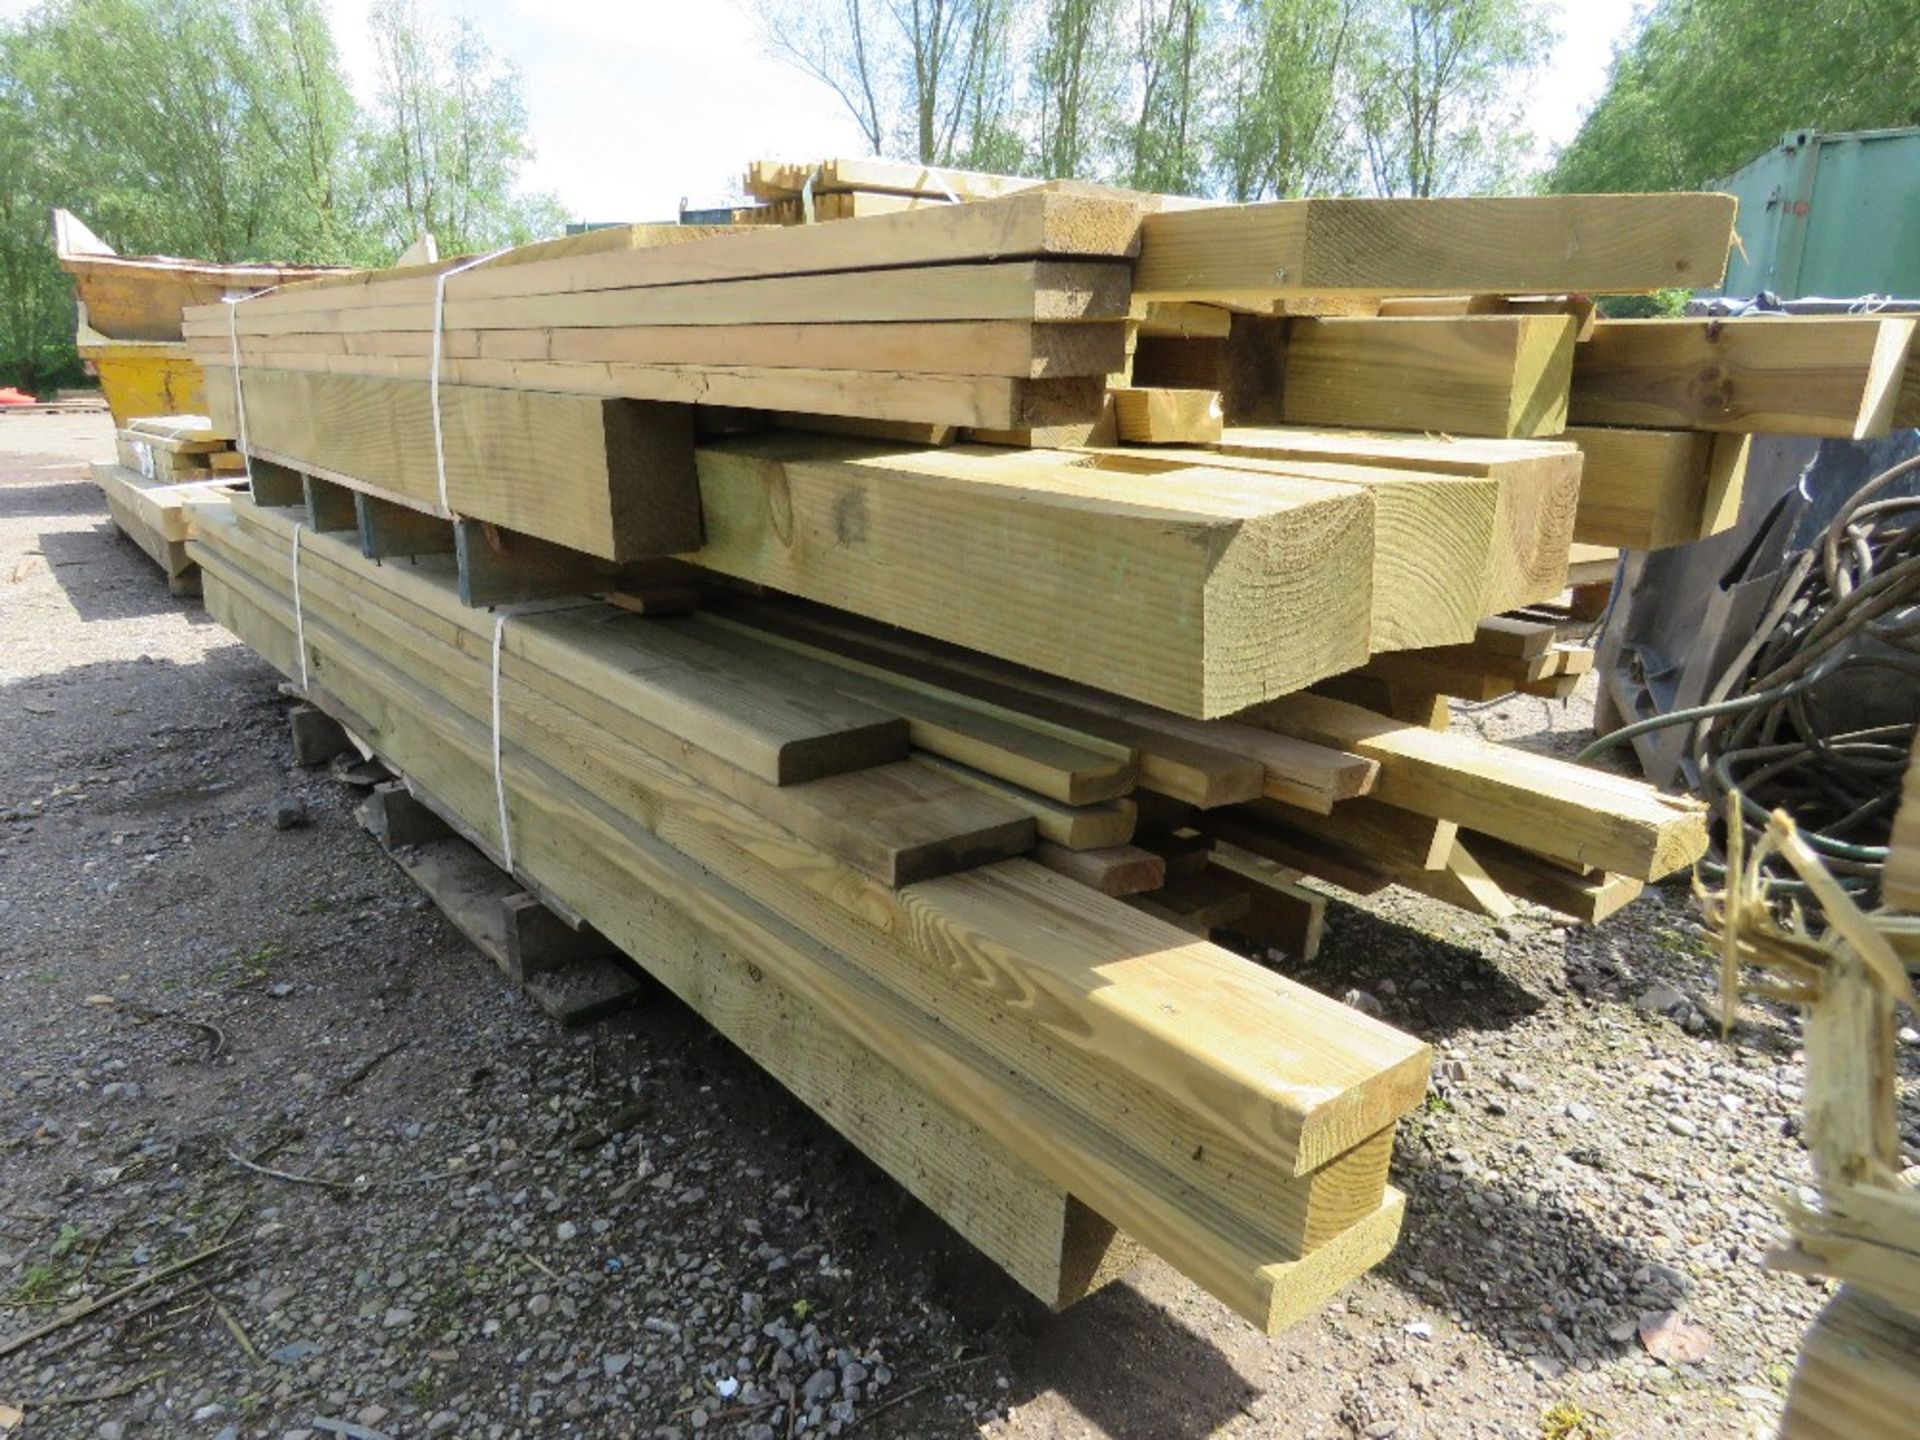 2 X BUNDLES OF TREATED FENCING TIMBERS, POSTS AND BOARDS AS SHOWN, 7-10FT LENGTH APPROX. - Image 2 of 5